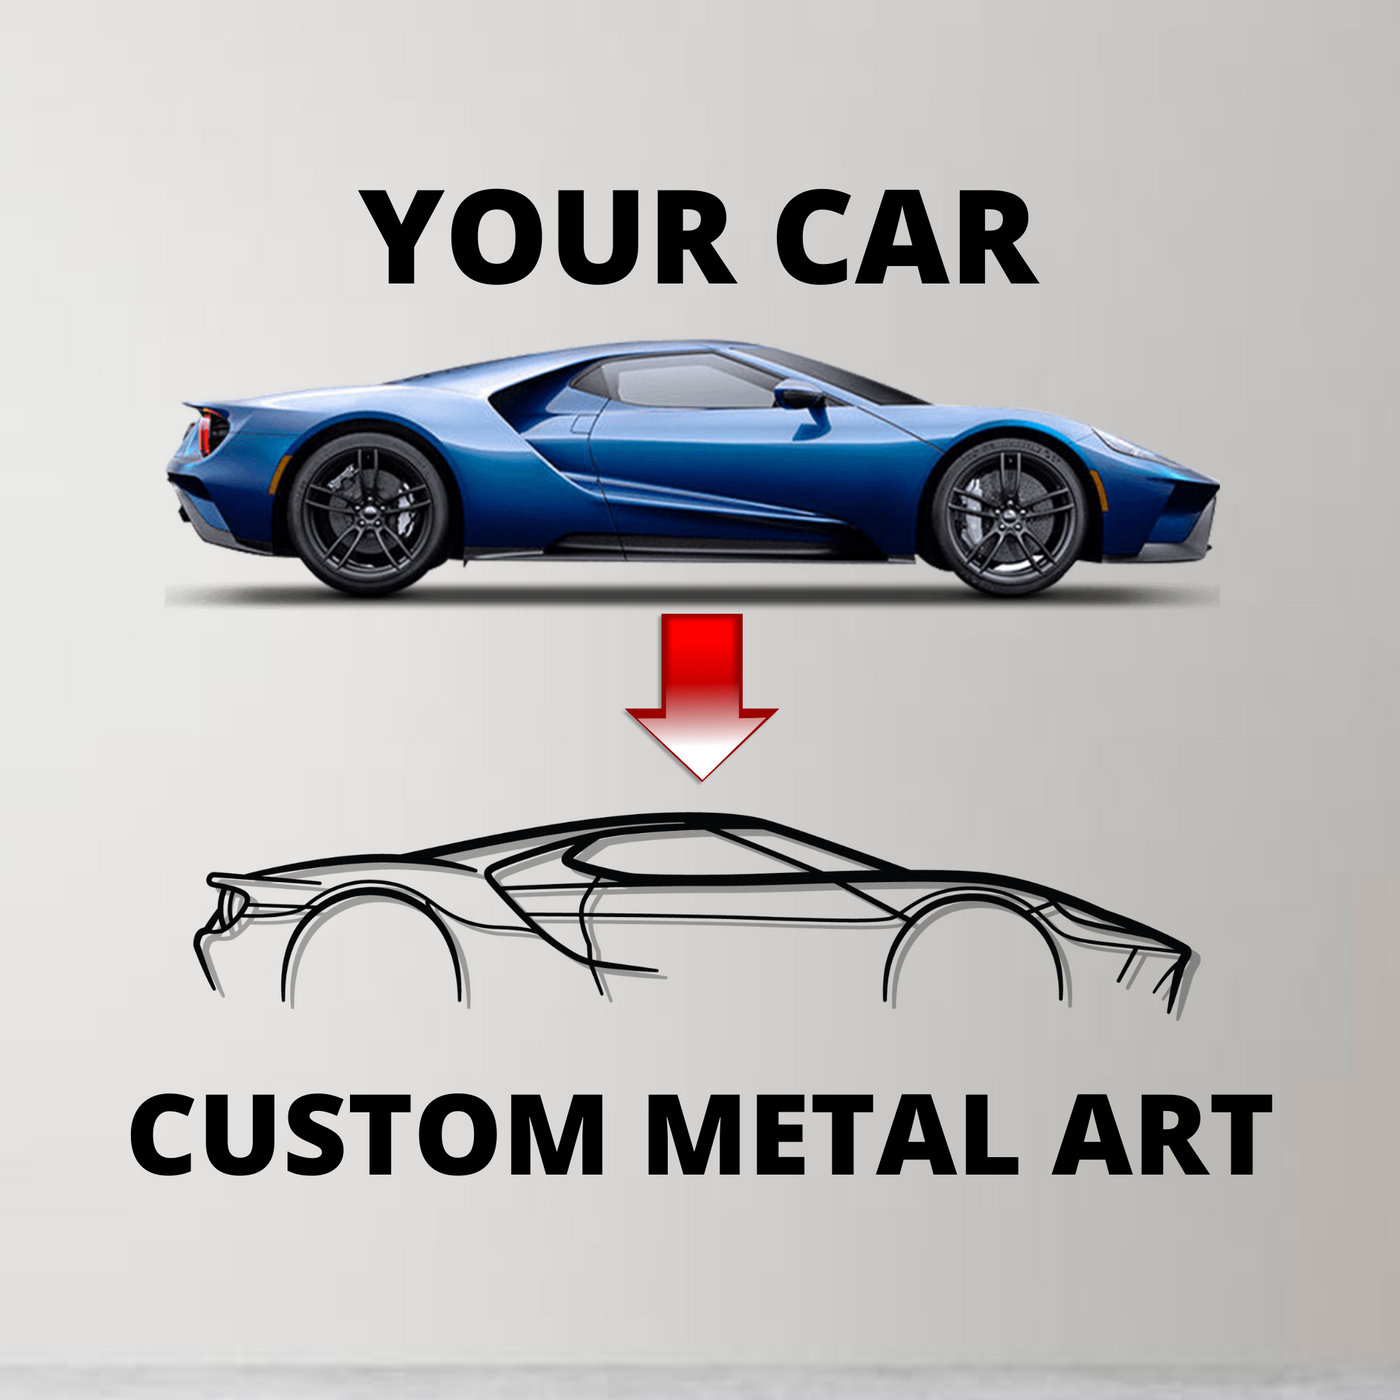 Galant VR-4 TYPE V Detailed Silhouette Metal Wall Art